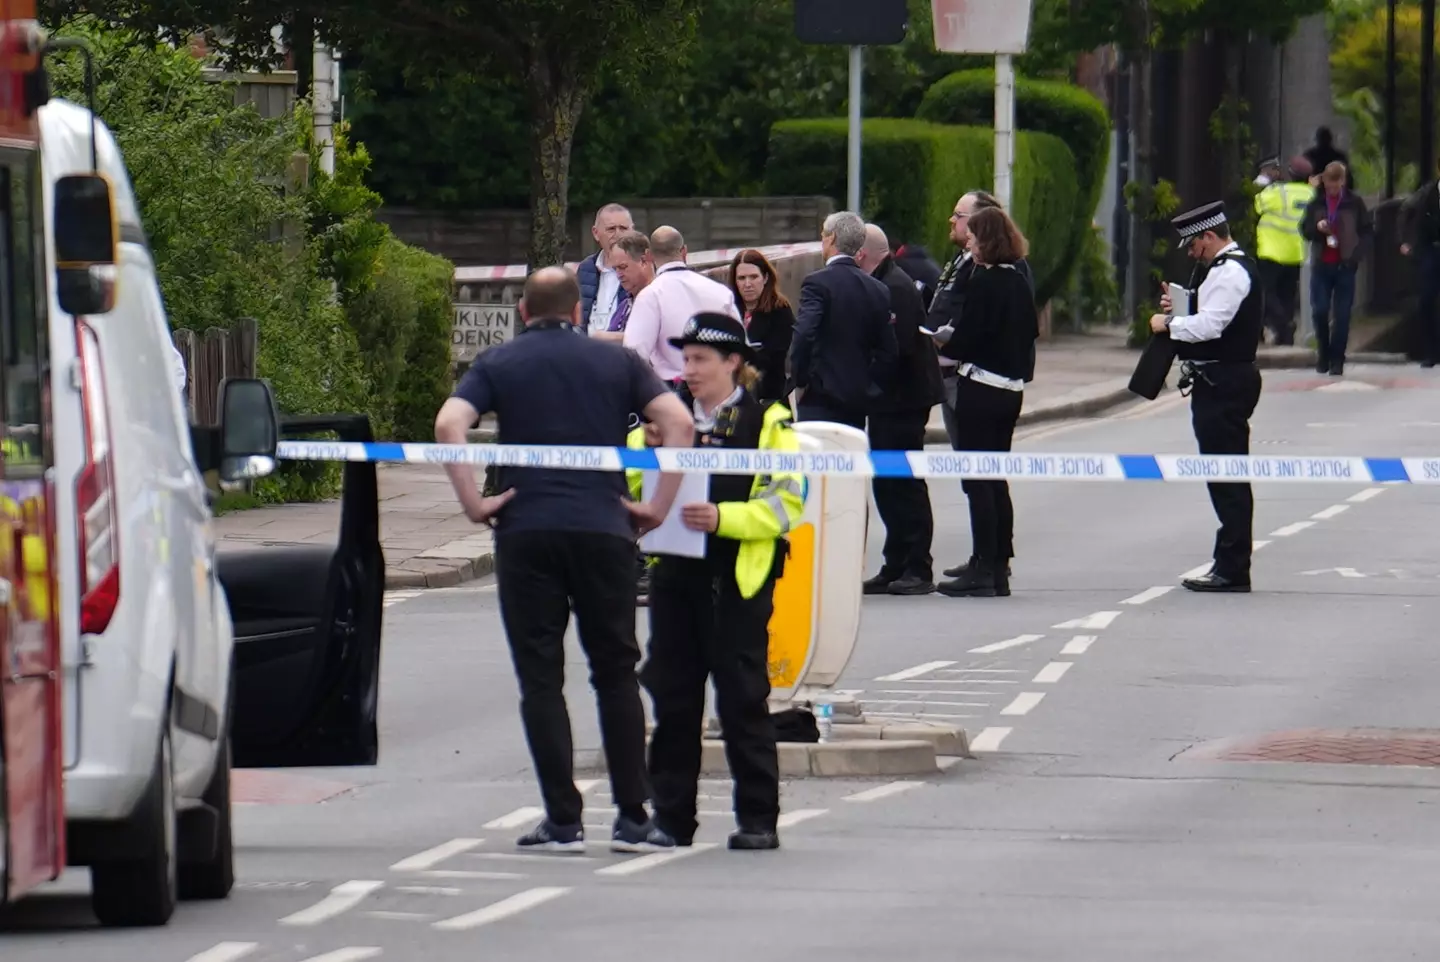 Police officers at Hainault, where the attack occurred. (PA)